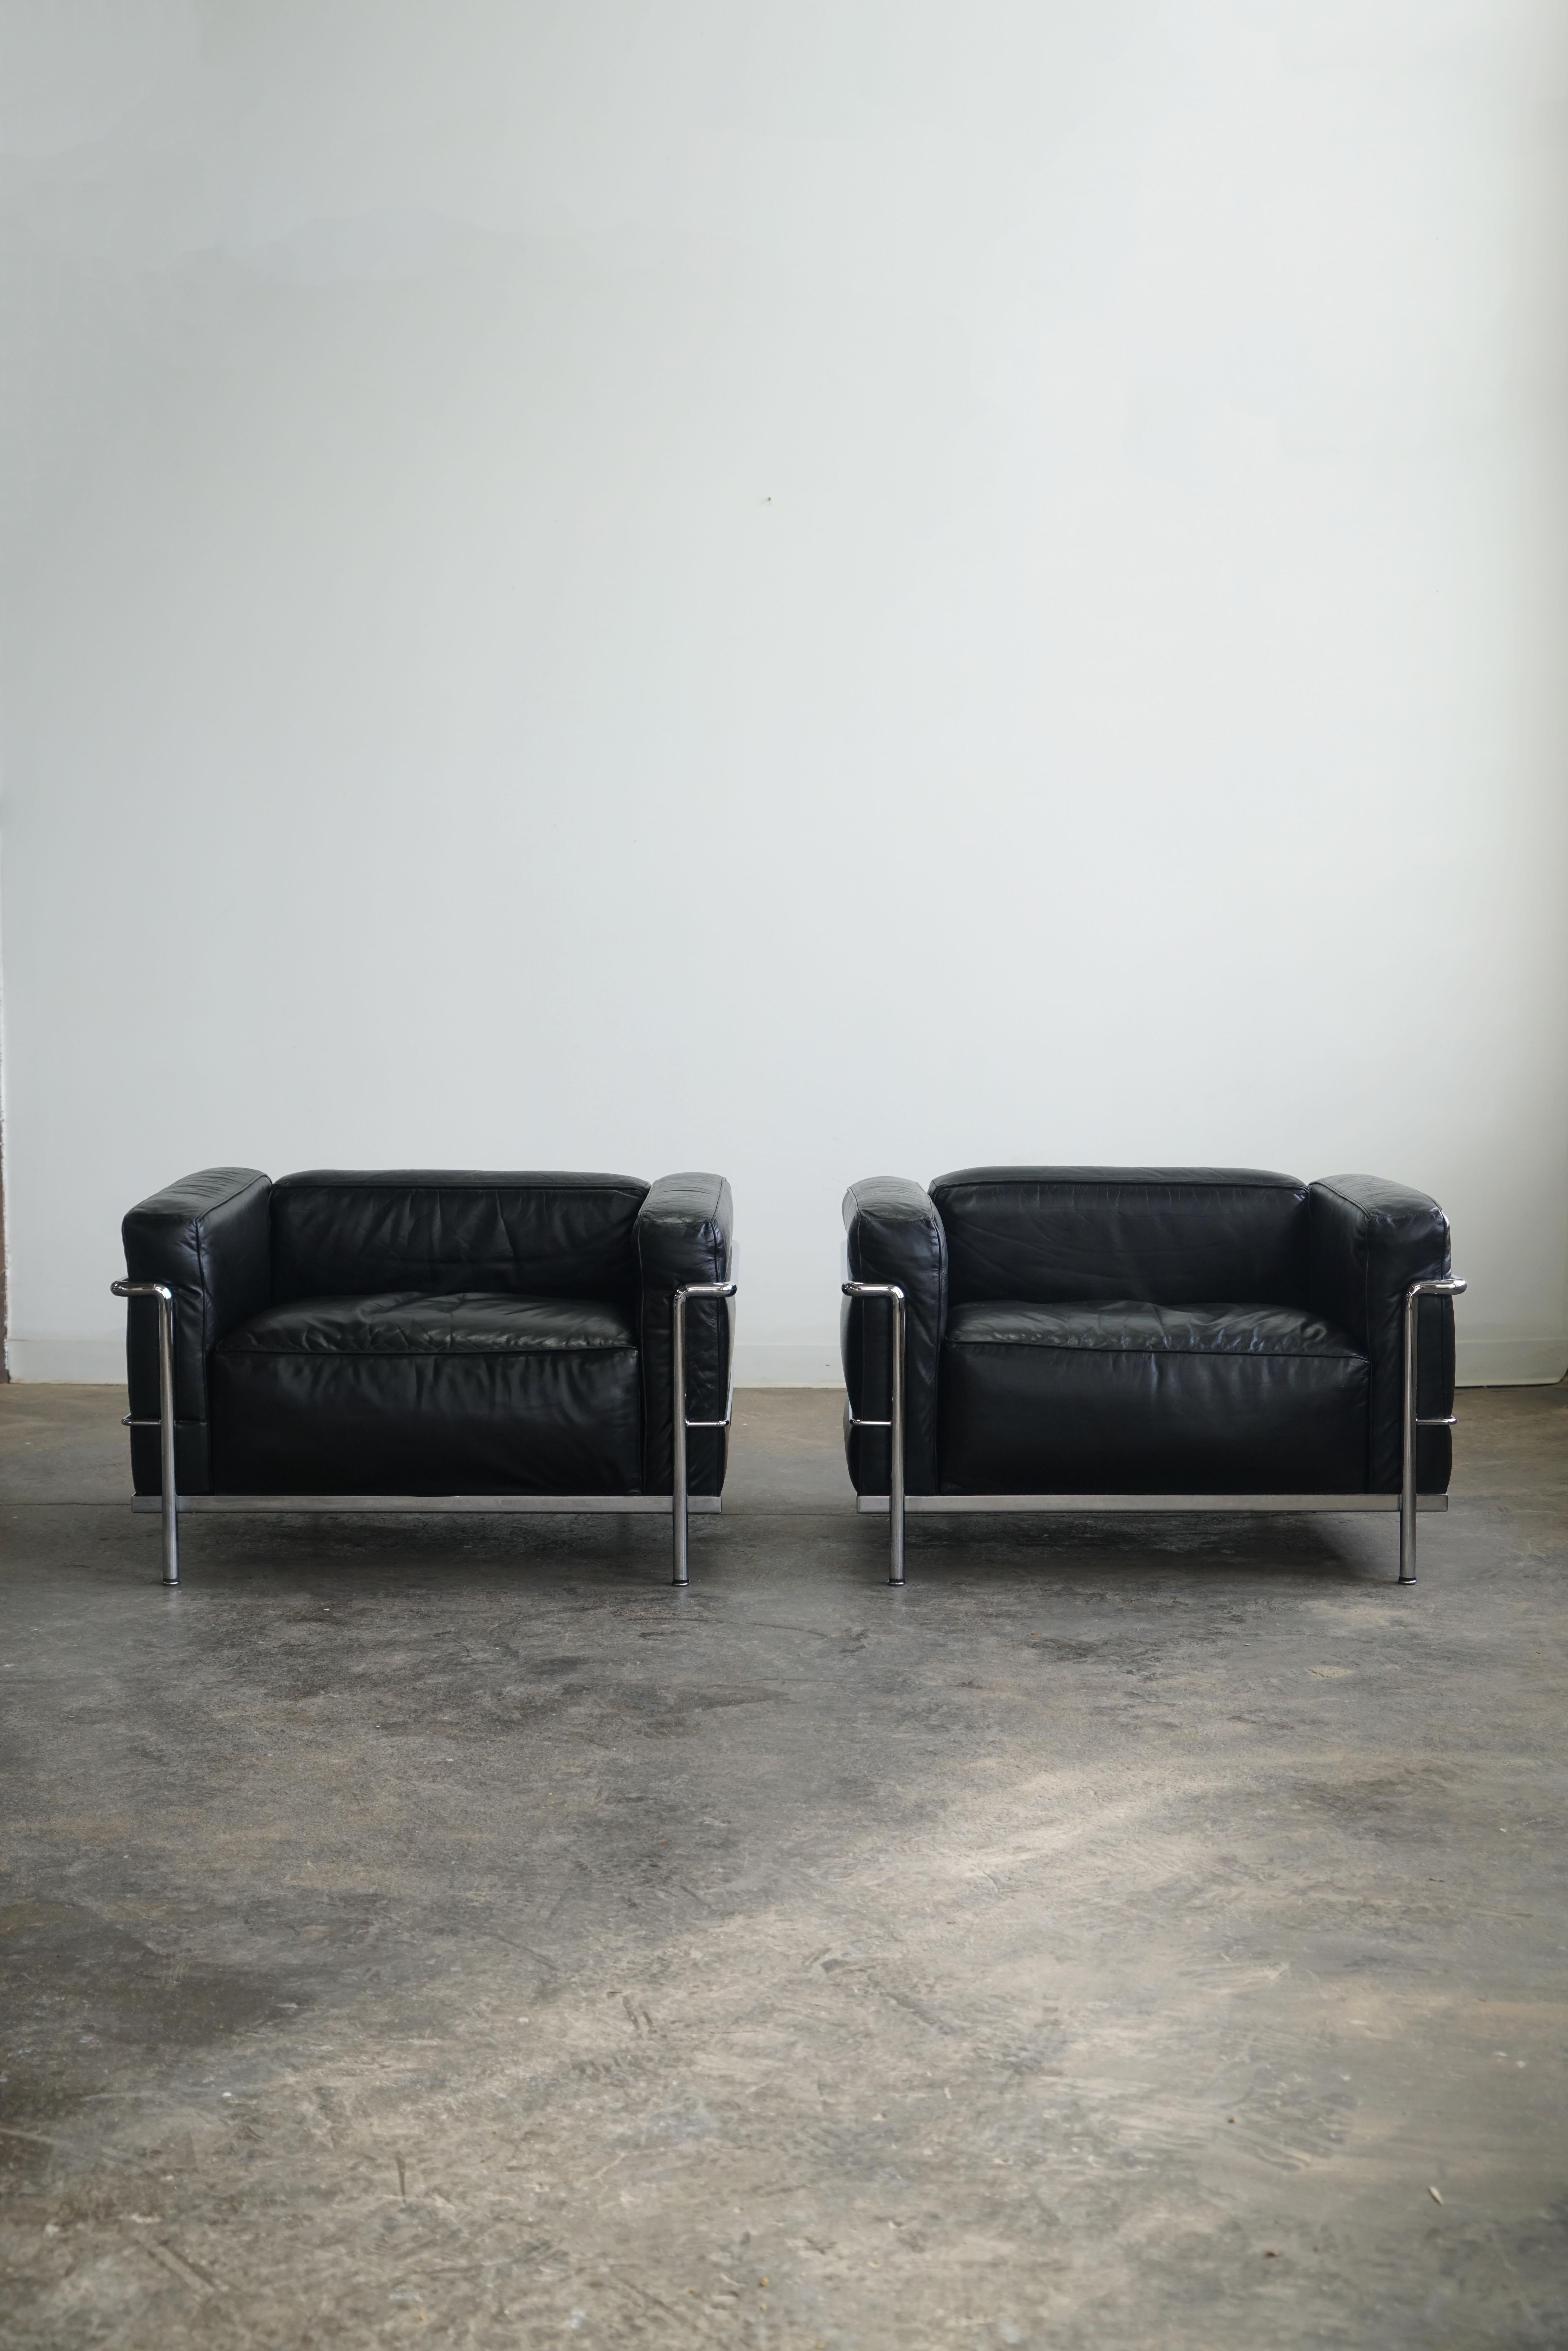 Pair of LC3 Grand Modele Armchairs for Cassina.
Black leather and chrome plated steel.

One of the most iconic chairs, the LC3 was designed in 1928 by Le Corbusier, Pierre Jeanneret, and Charlotte Perriand. The chair is a true symbol of timeless